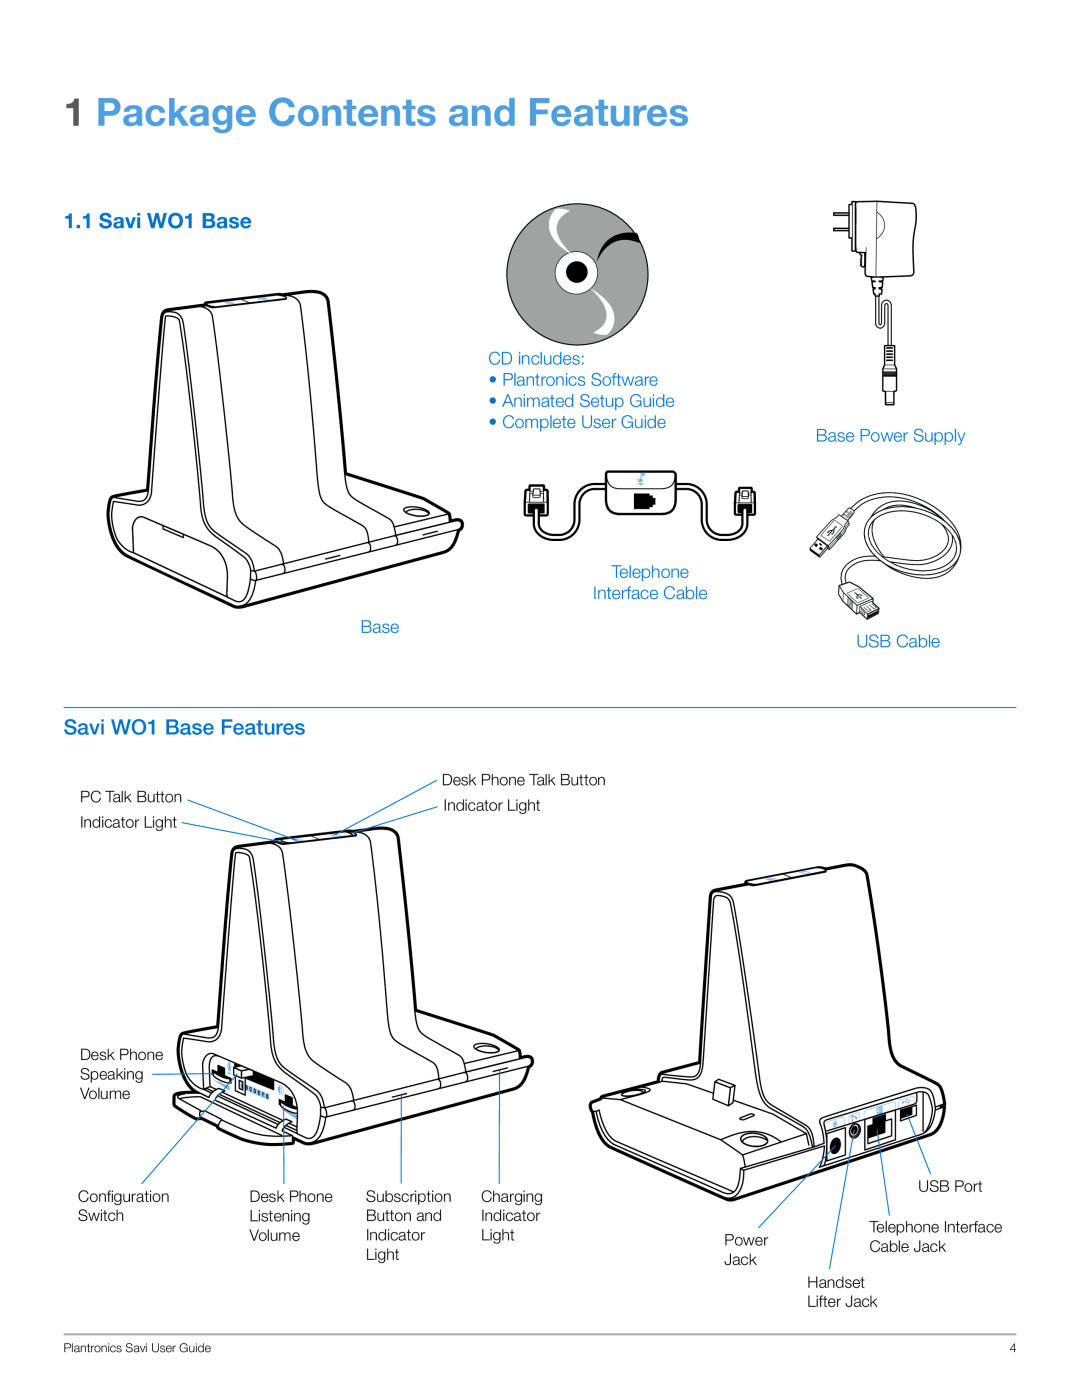 Plantronics WO201 Package Contents and Features, Savi WO1 Base Features, CD includes • Plantronics Software, USB Cable 